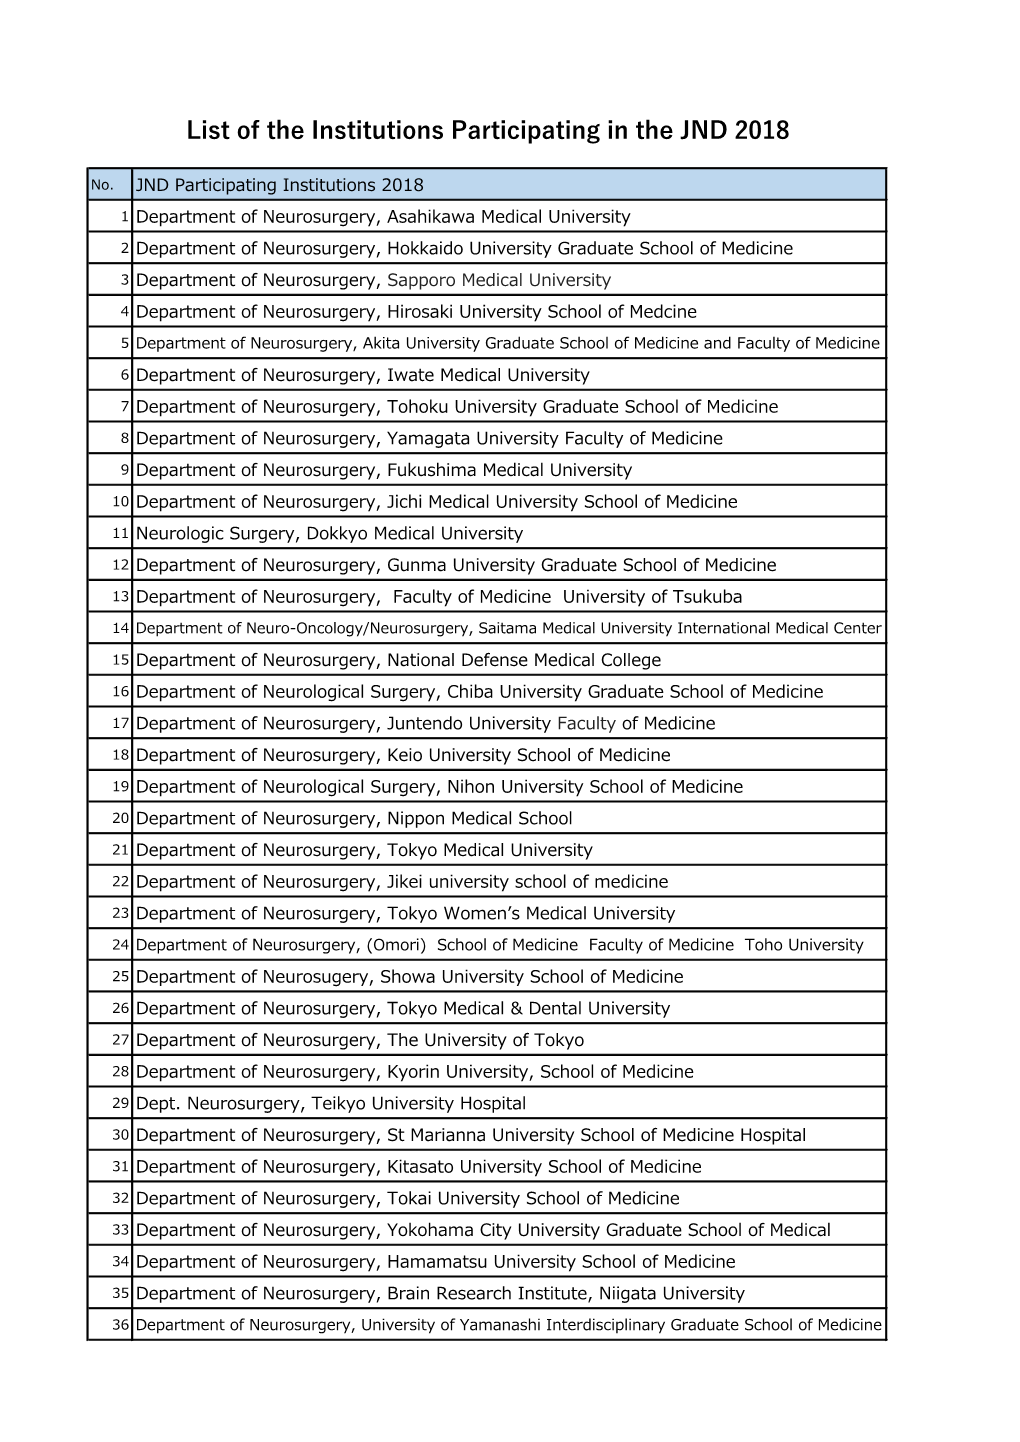 List of the Institutions Participating in the JND 2018